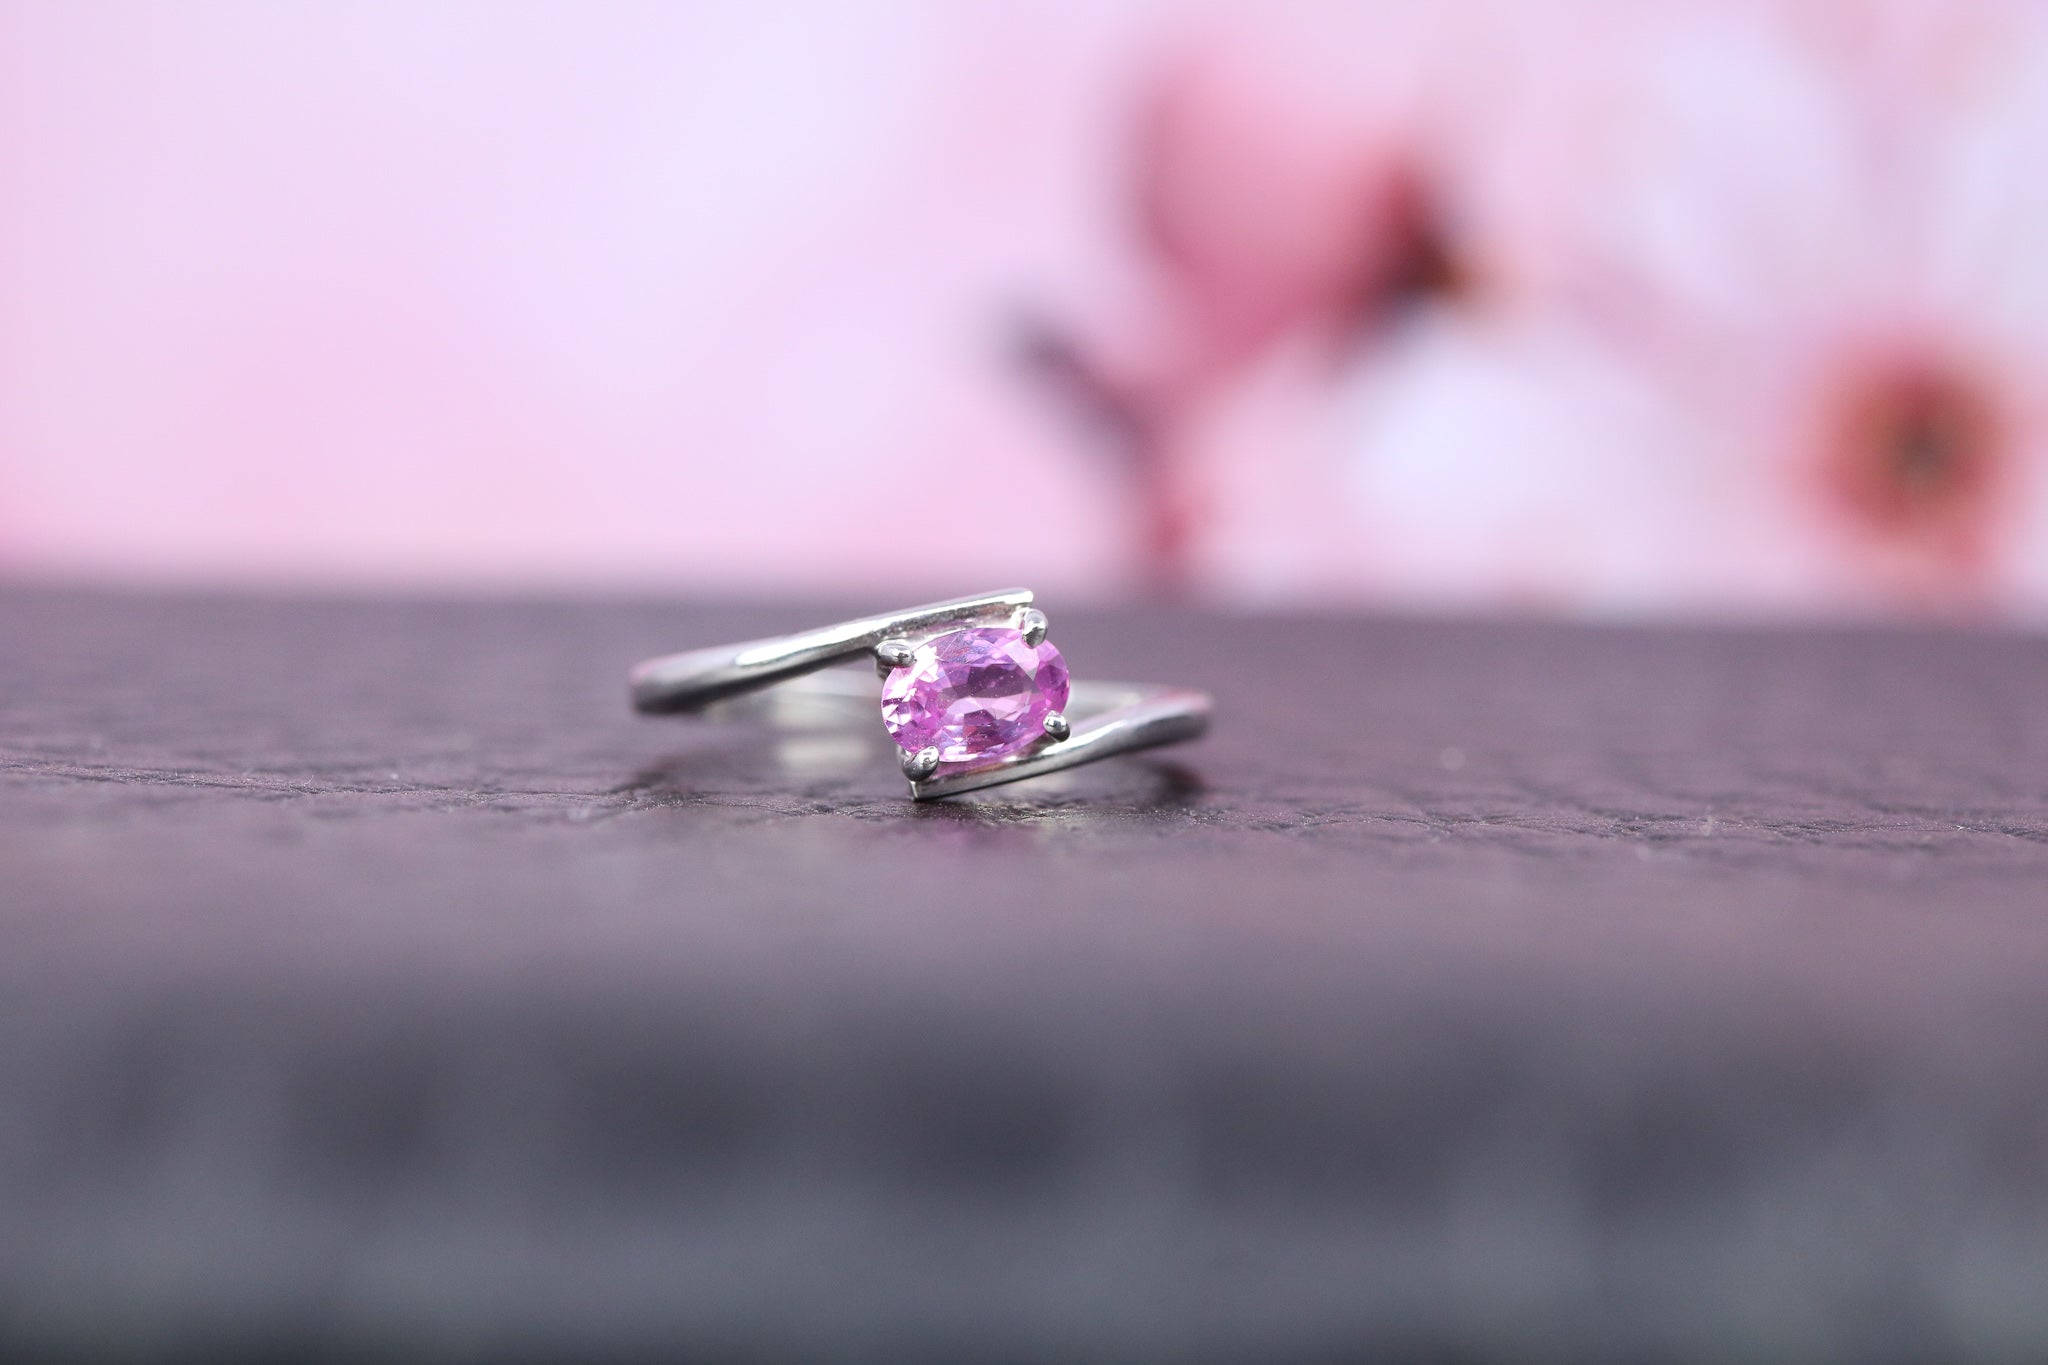 18ct White Gold & Pink Sapphire Ring - W6015 - Hallmark Jewellers Formby & The Jewellers Bench Widnes